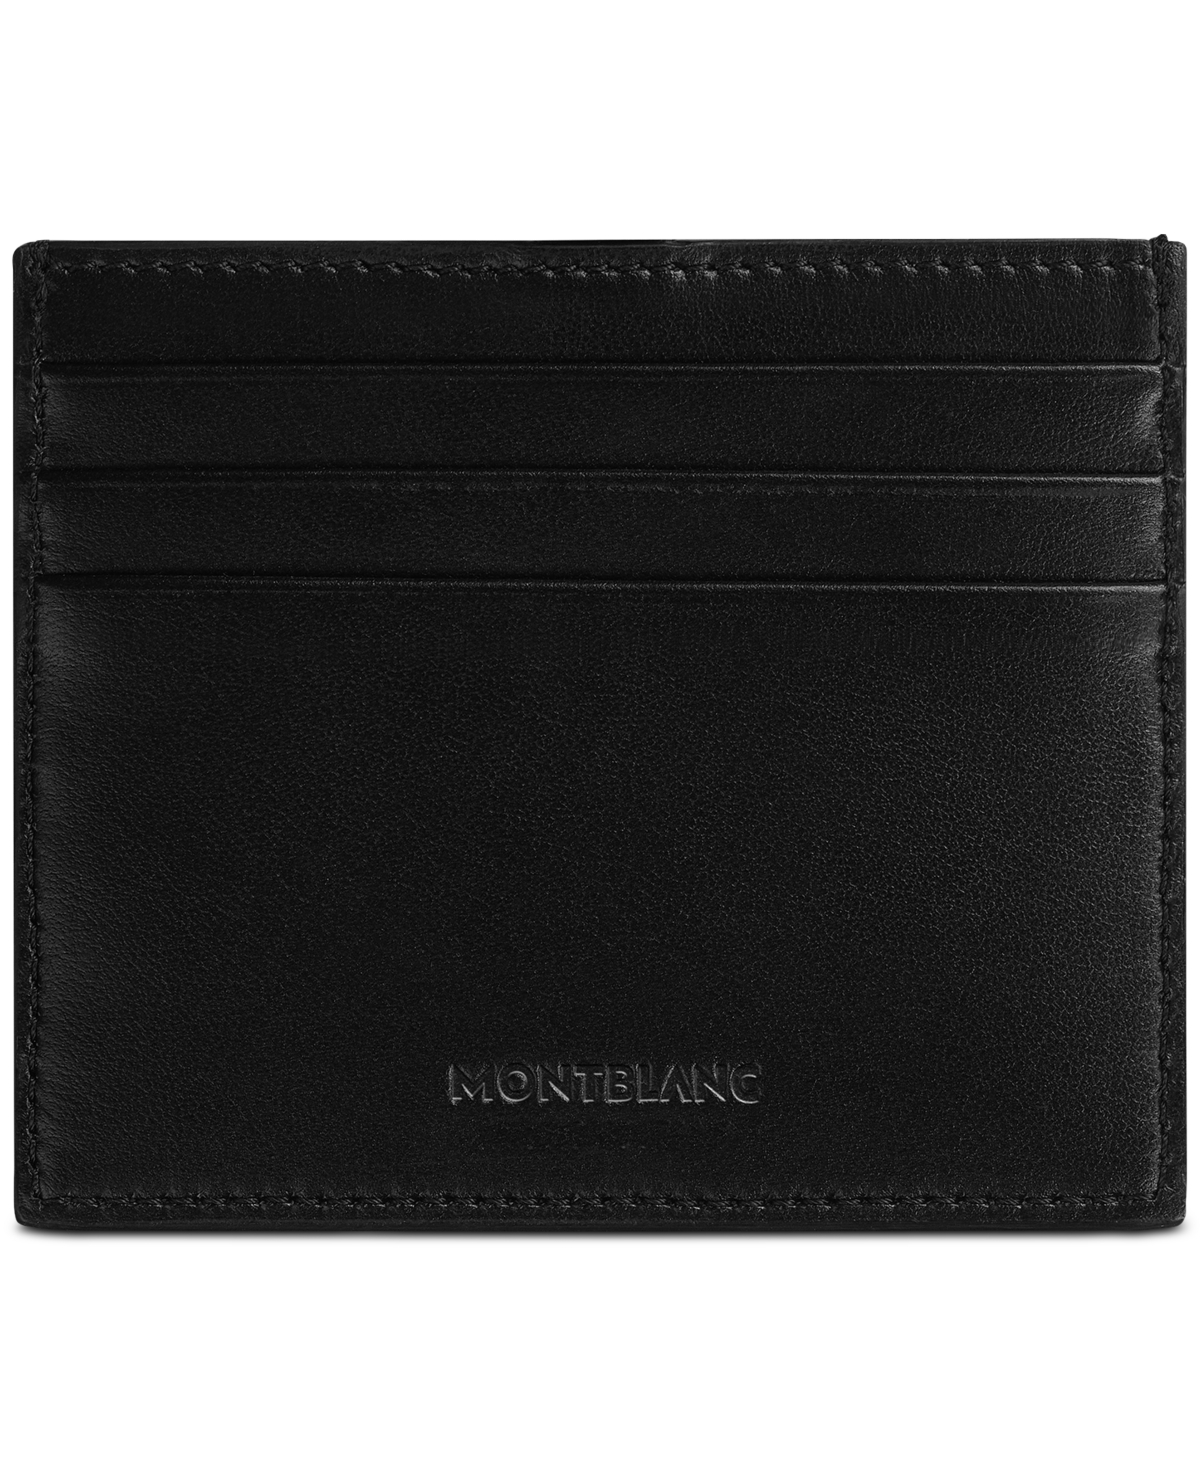 Montblanc Extreme 3.0 Leather Card Holder In Black